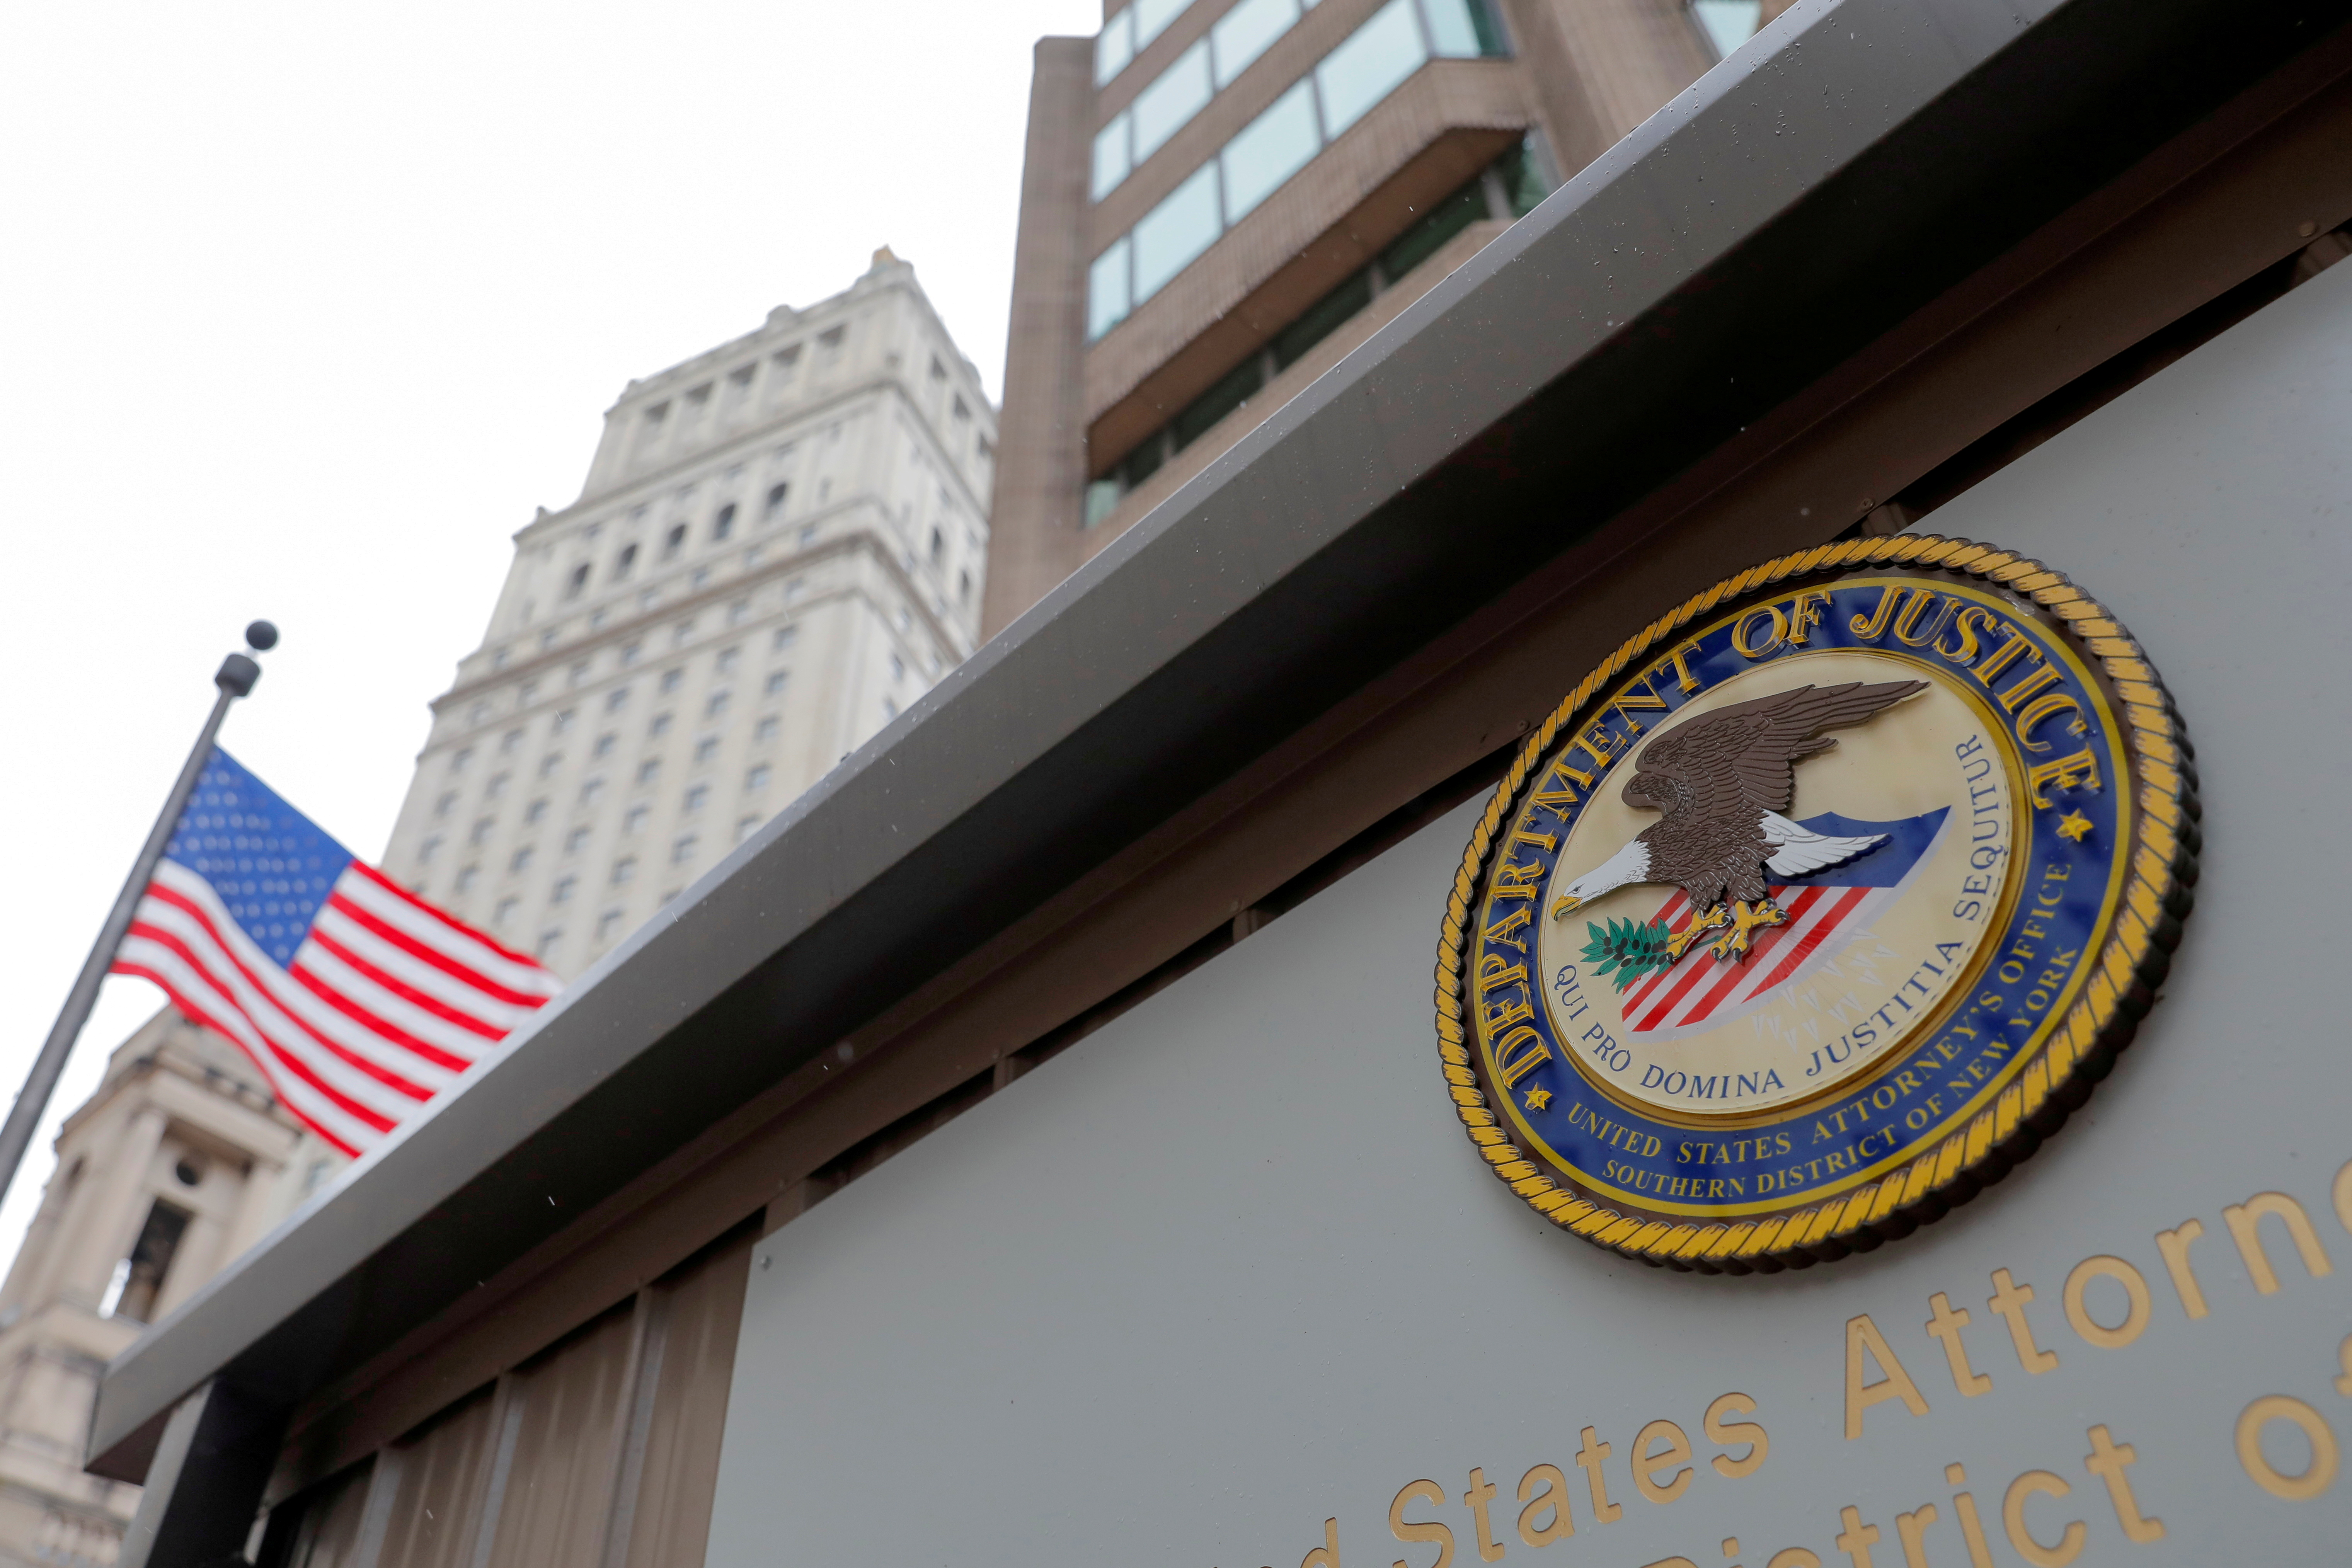 The US Department of Justice announced the dismantling of a botnet controlled by Russian intelligence